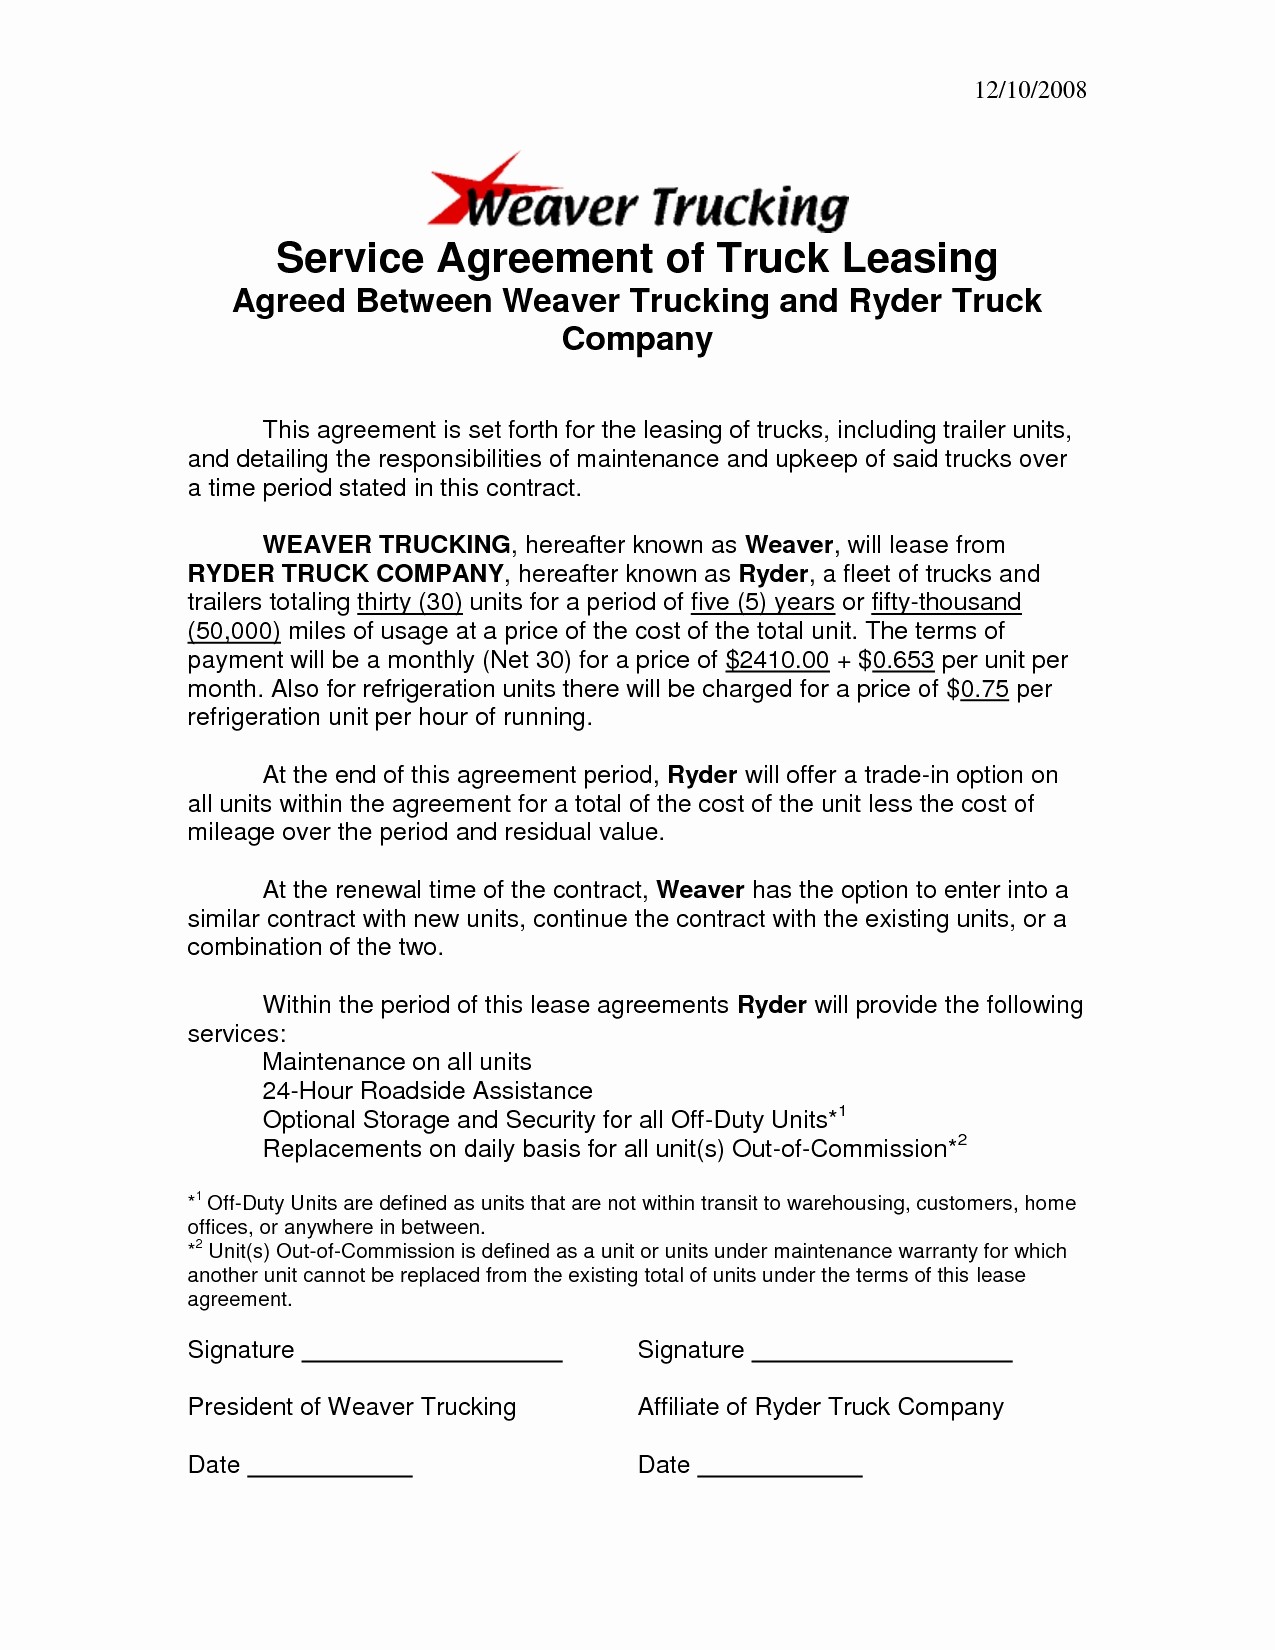 50 Elegant Truck Driver Contract Agreement Template DOCUMENTS